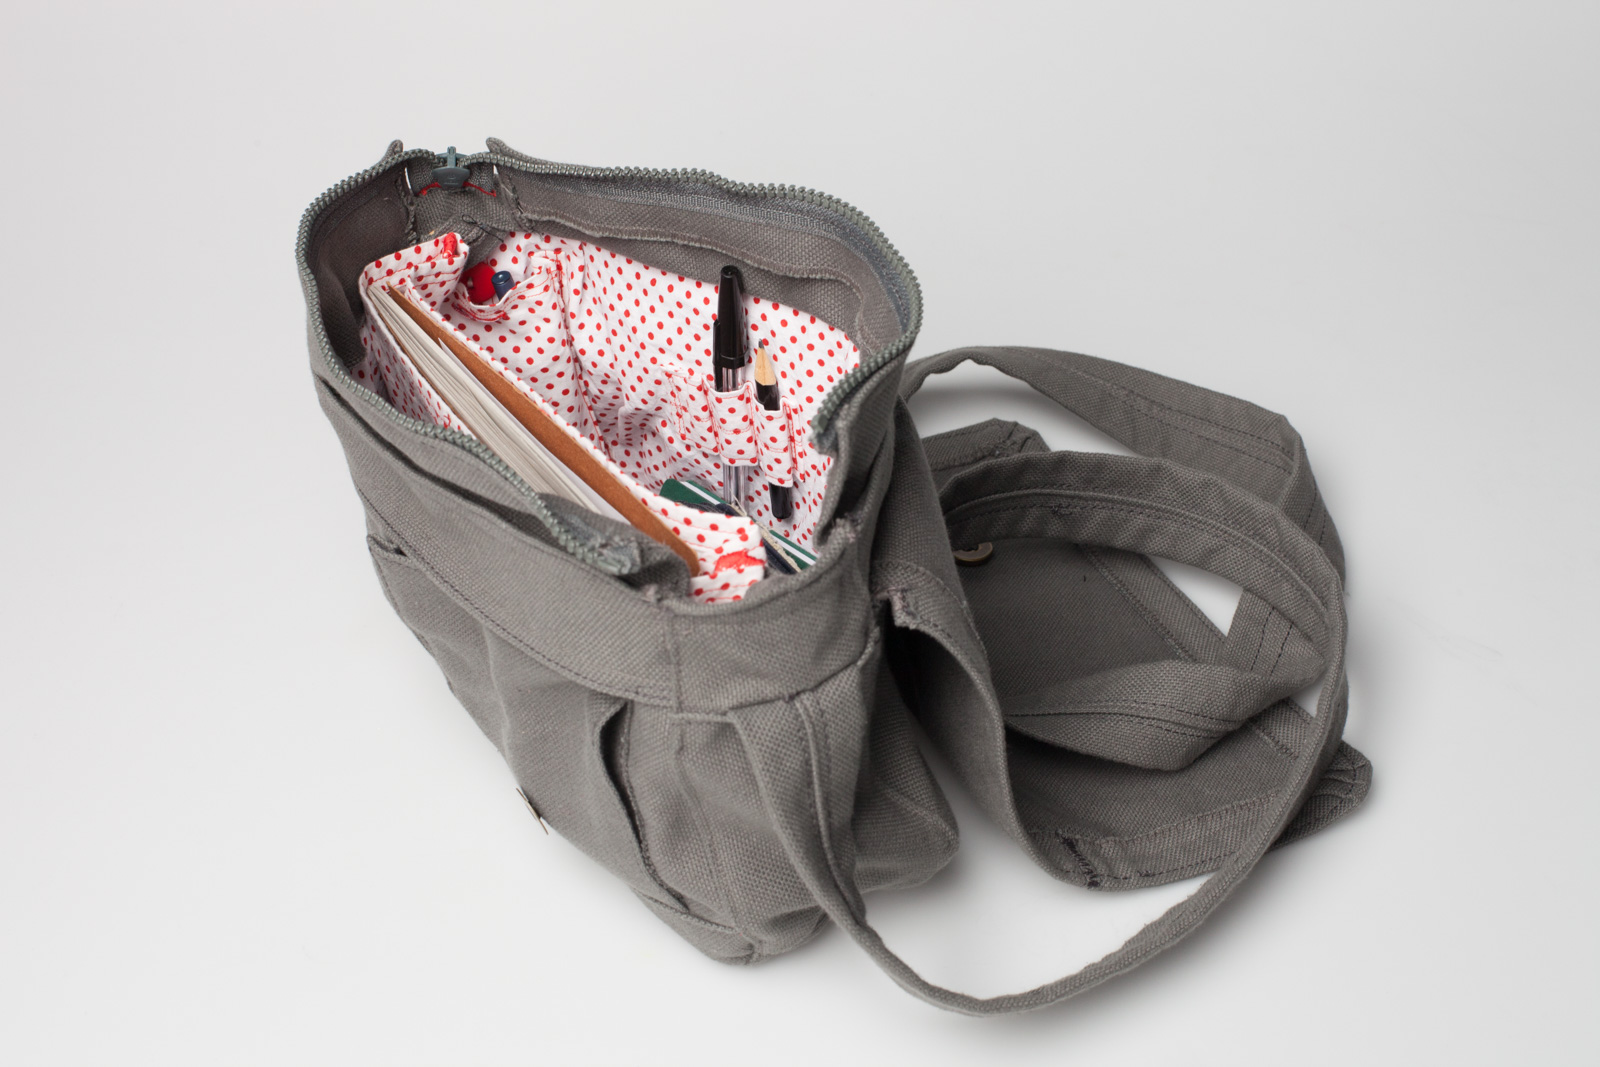 a simple fabric handbag – open, you can see the white with red dots inlay and a few pens and books on the inside